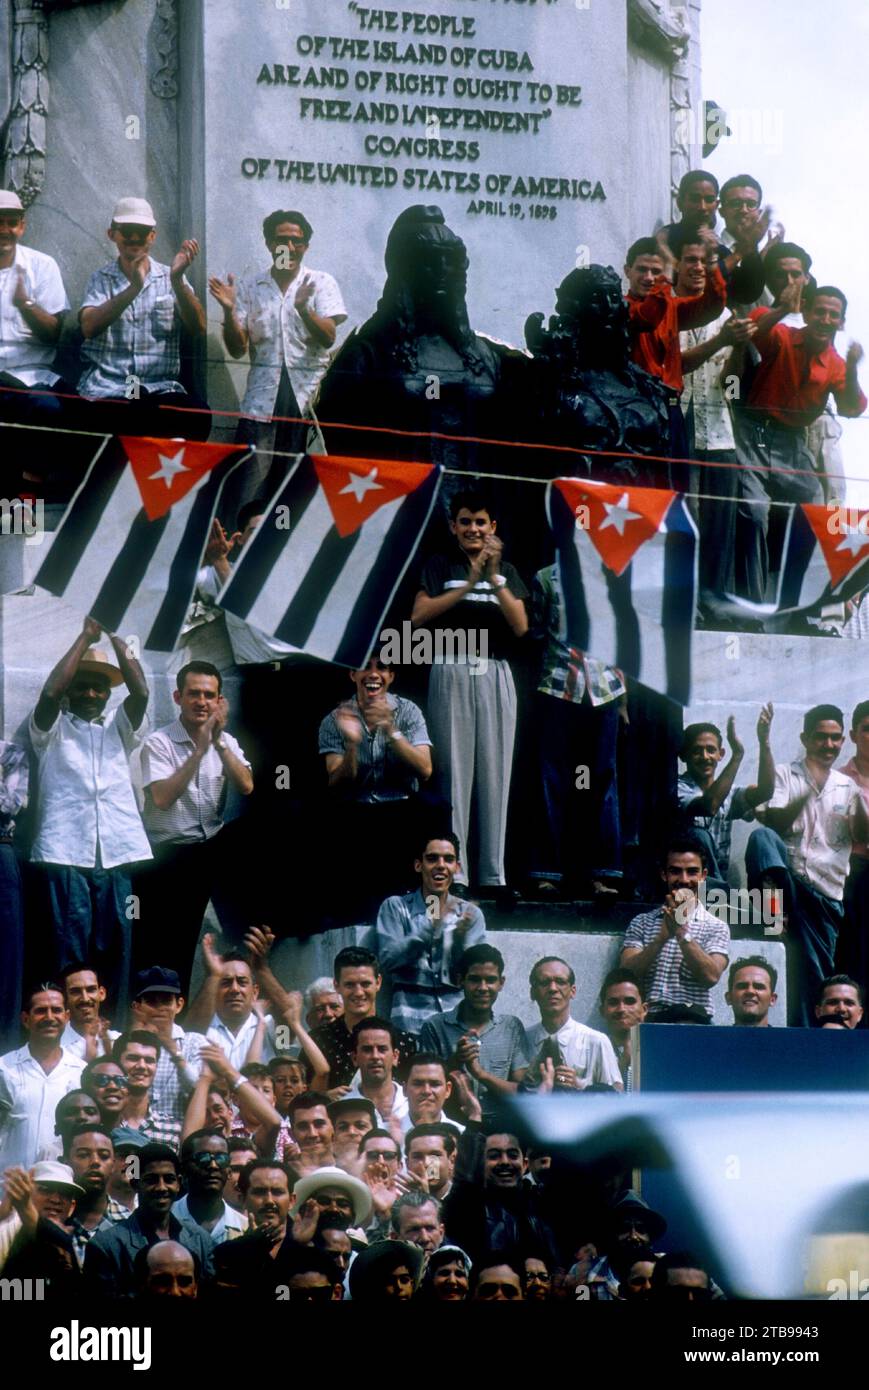 HAVANA, CUBA - FEBRUARY 24:  Fans watch from the stands during the 1957 Cuban Grand Prix on February 24, 1957 in Havana, Cuba.  Juan Manuel Fangio won the race.  (Photo by Hy Peskin) Stock Photo